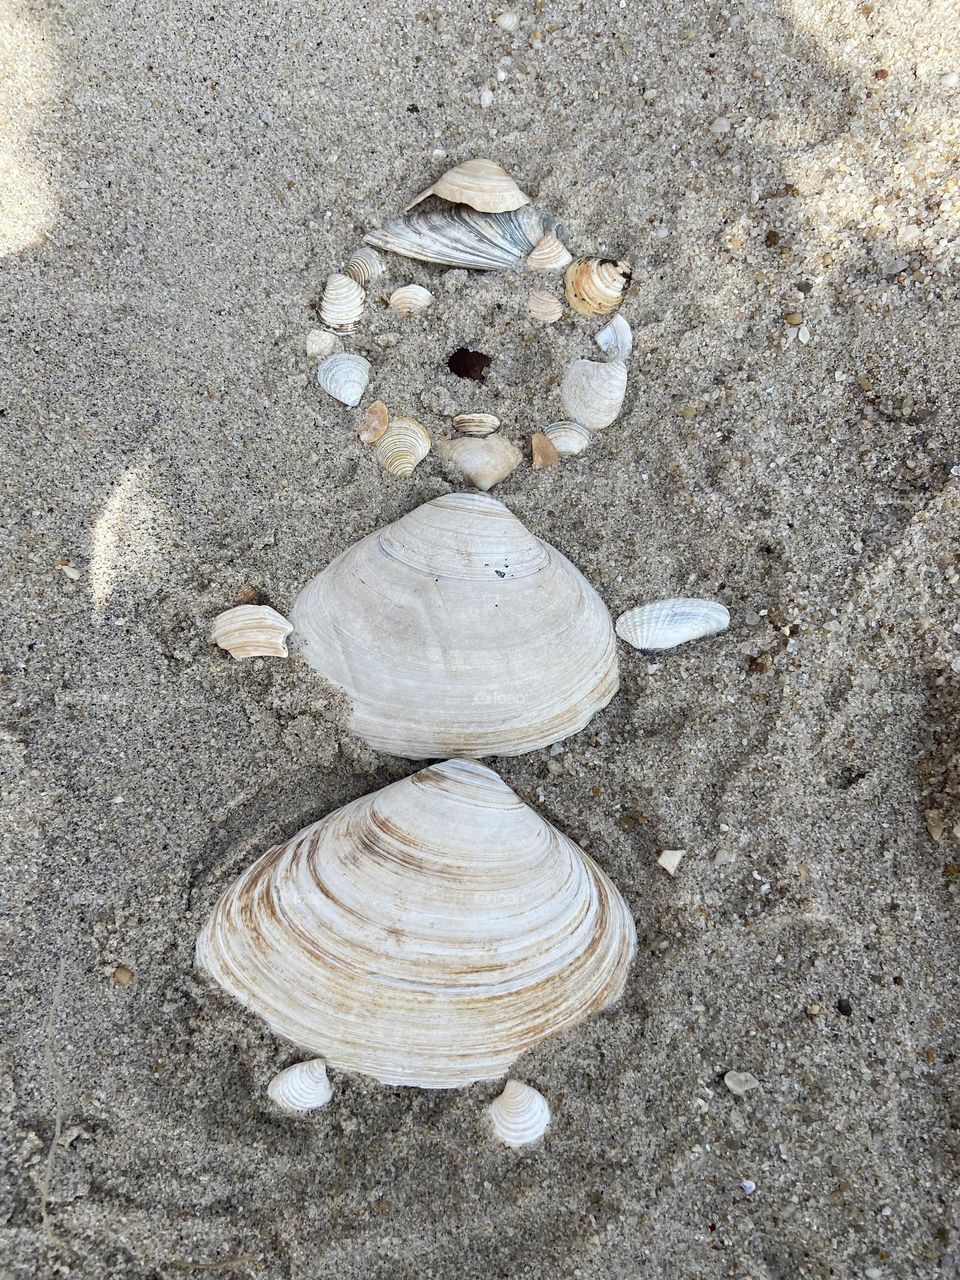 Seashell woman in the sand. Photo of a seashell woman I made while enjoying the morning at a beach in Lavallette, NJ. You’re never too old to play in the sand! Don’t forget to make time for fun! 